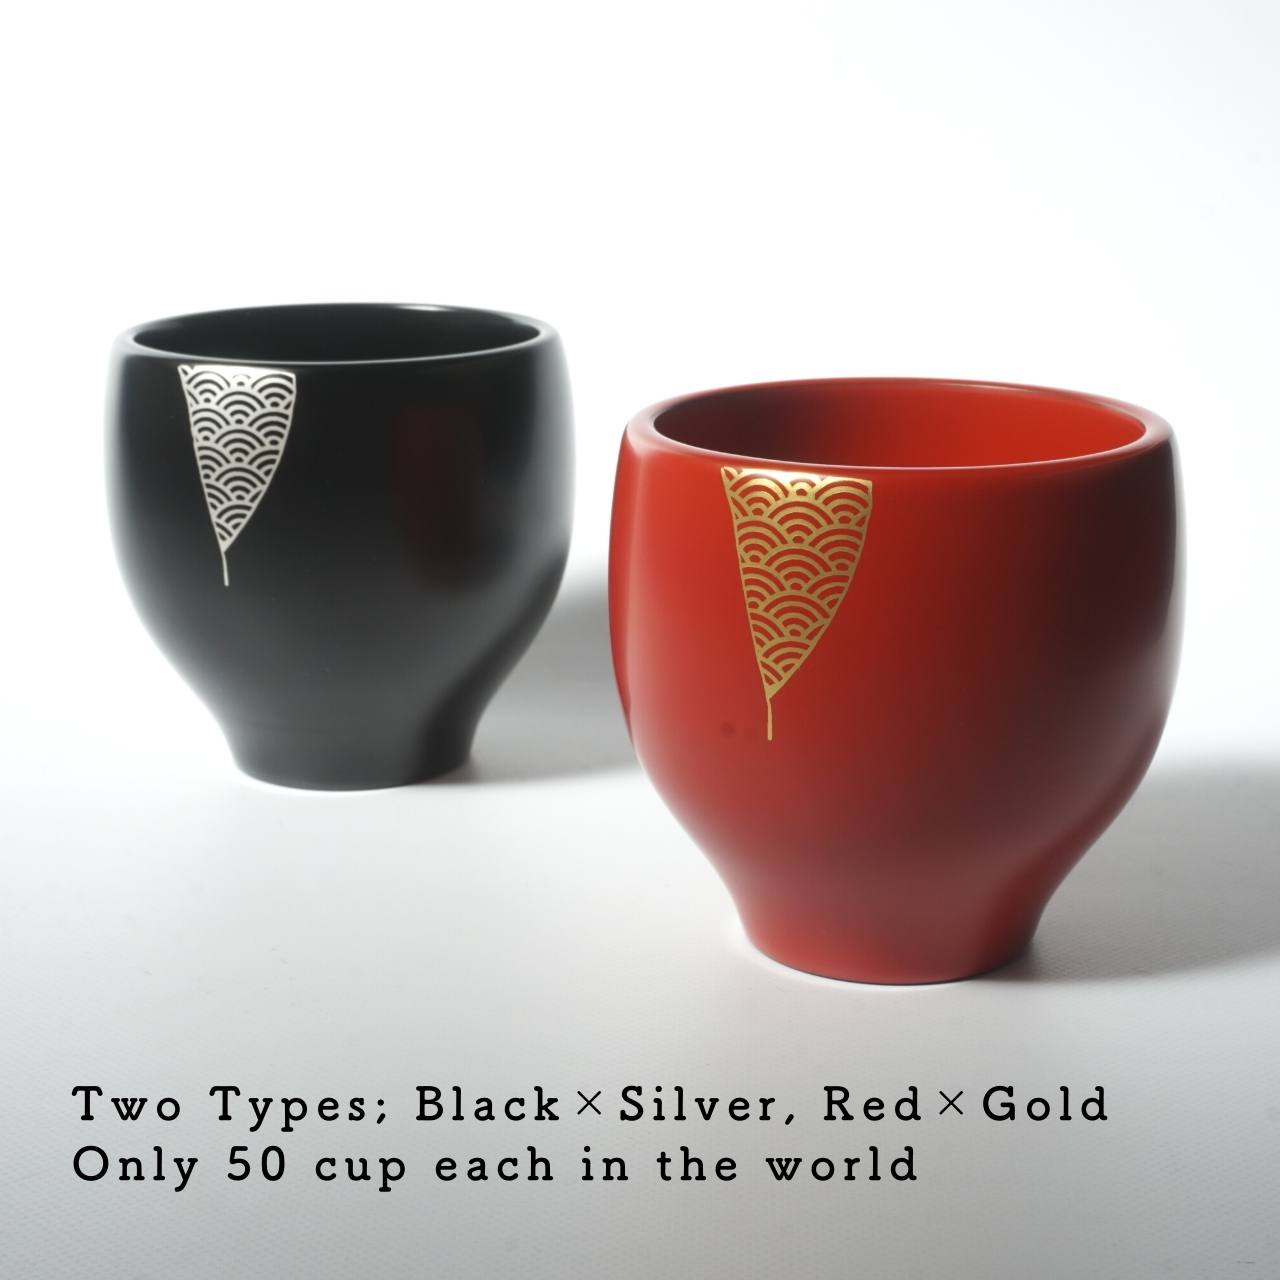 Yobitsugi Cup - Red Lacquered Cup Handcrafted in Japan